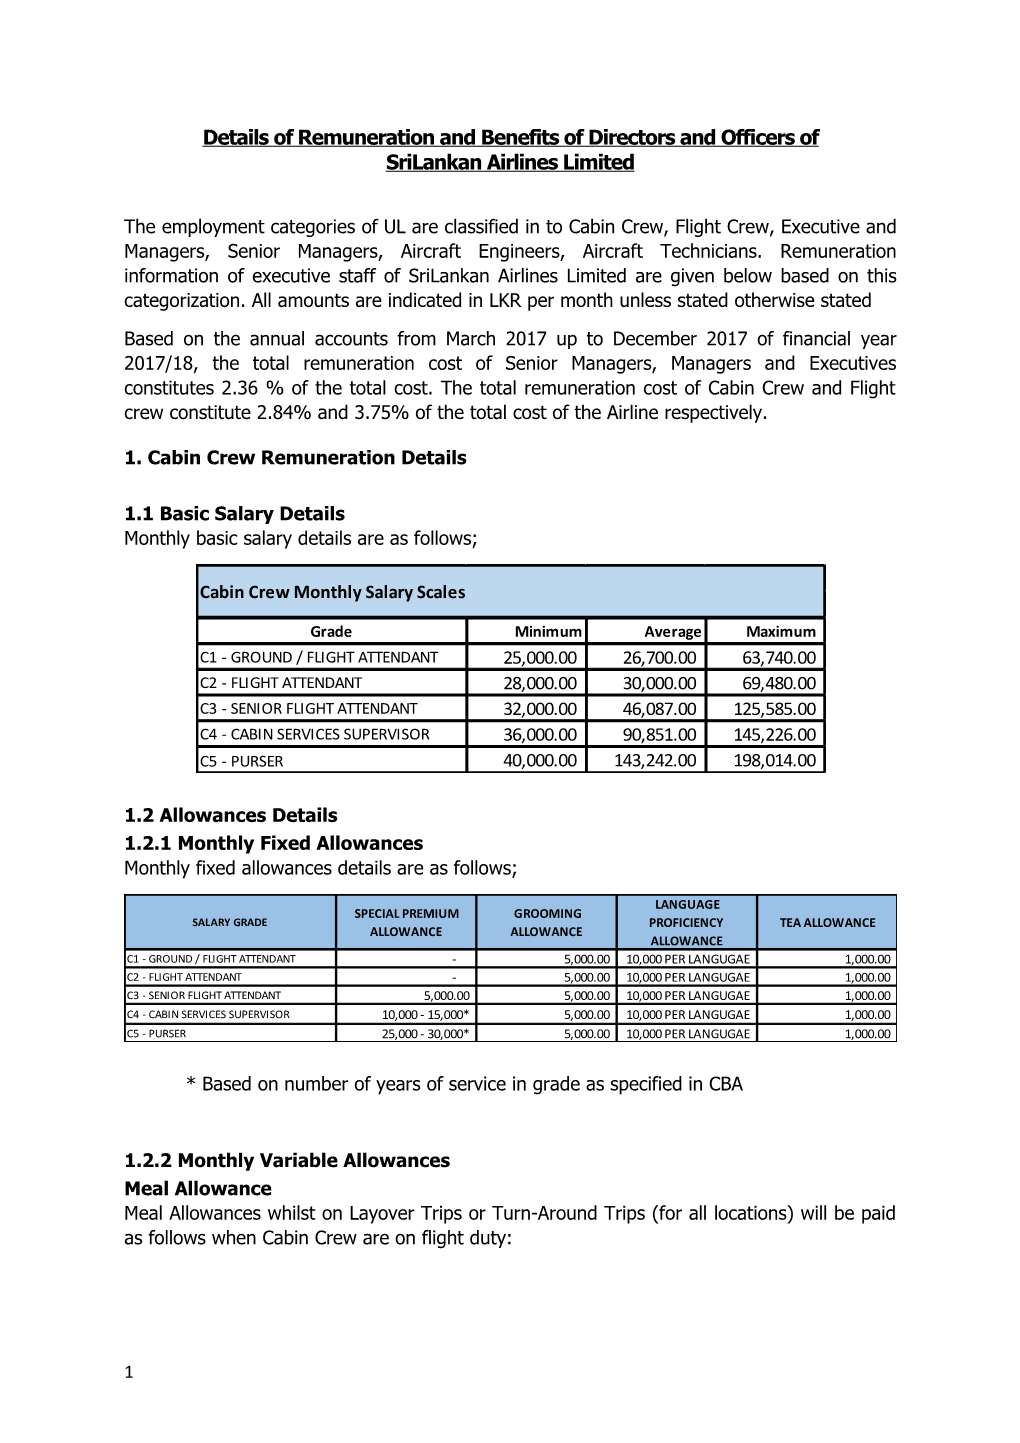 Details of Remuneration and Benefits of Directors and Officers of Srilankan Airlines Limited